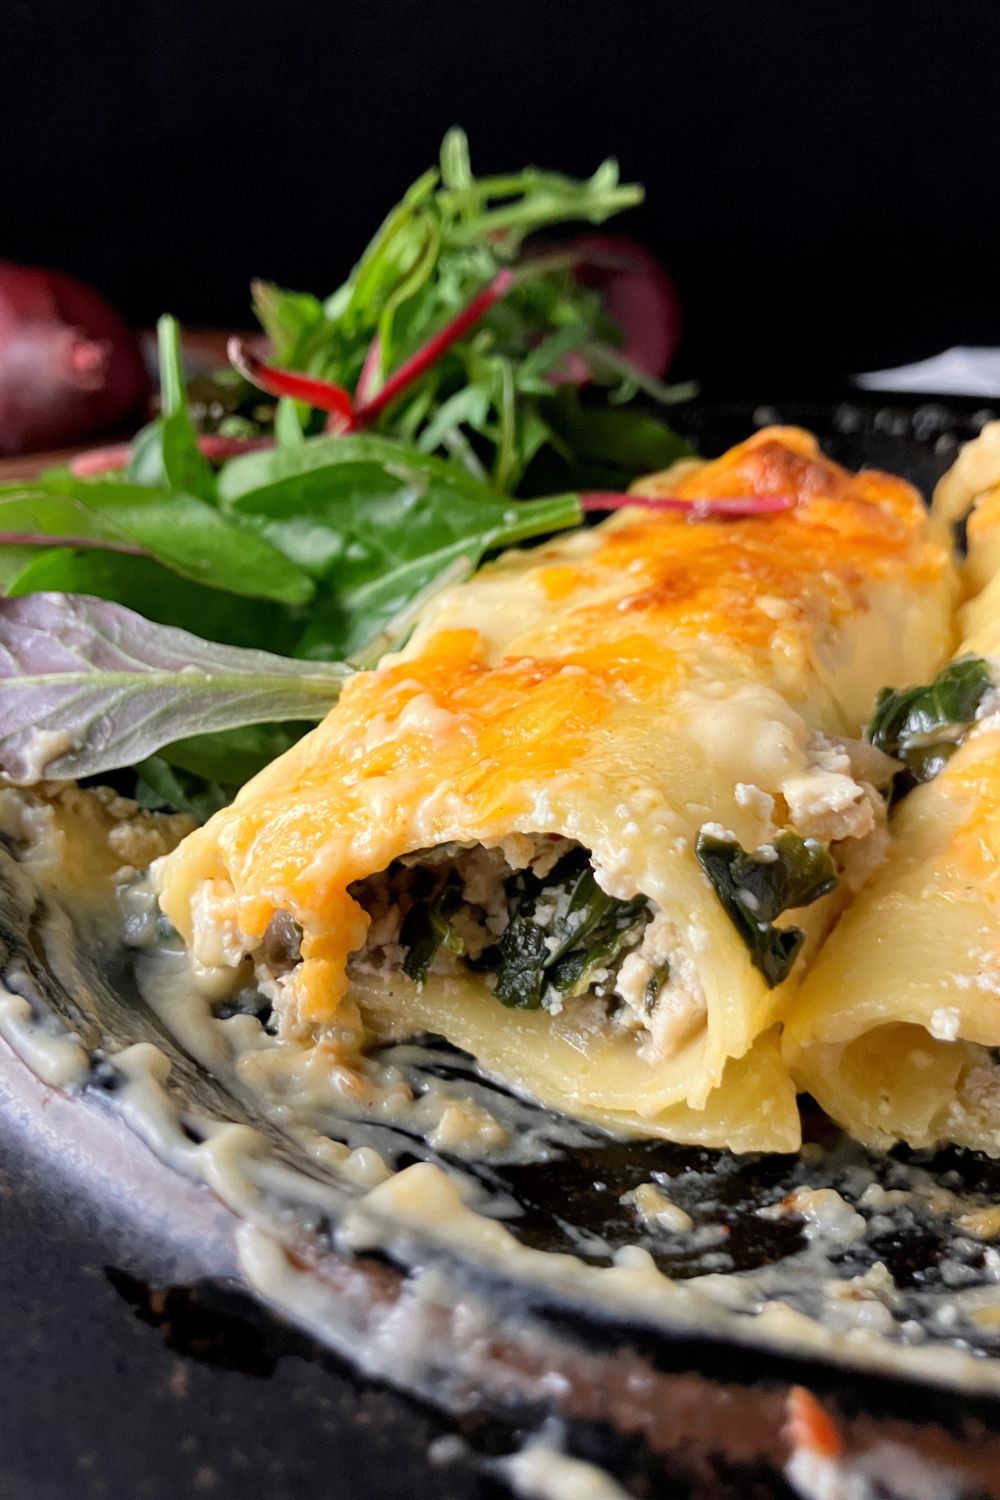 Spinach and Ricotta Lasagne Rolls (with Cheddar Cheese Sauce)